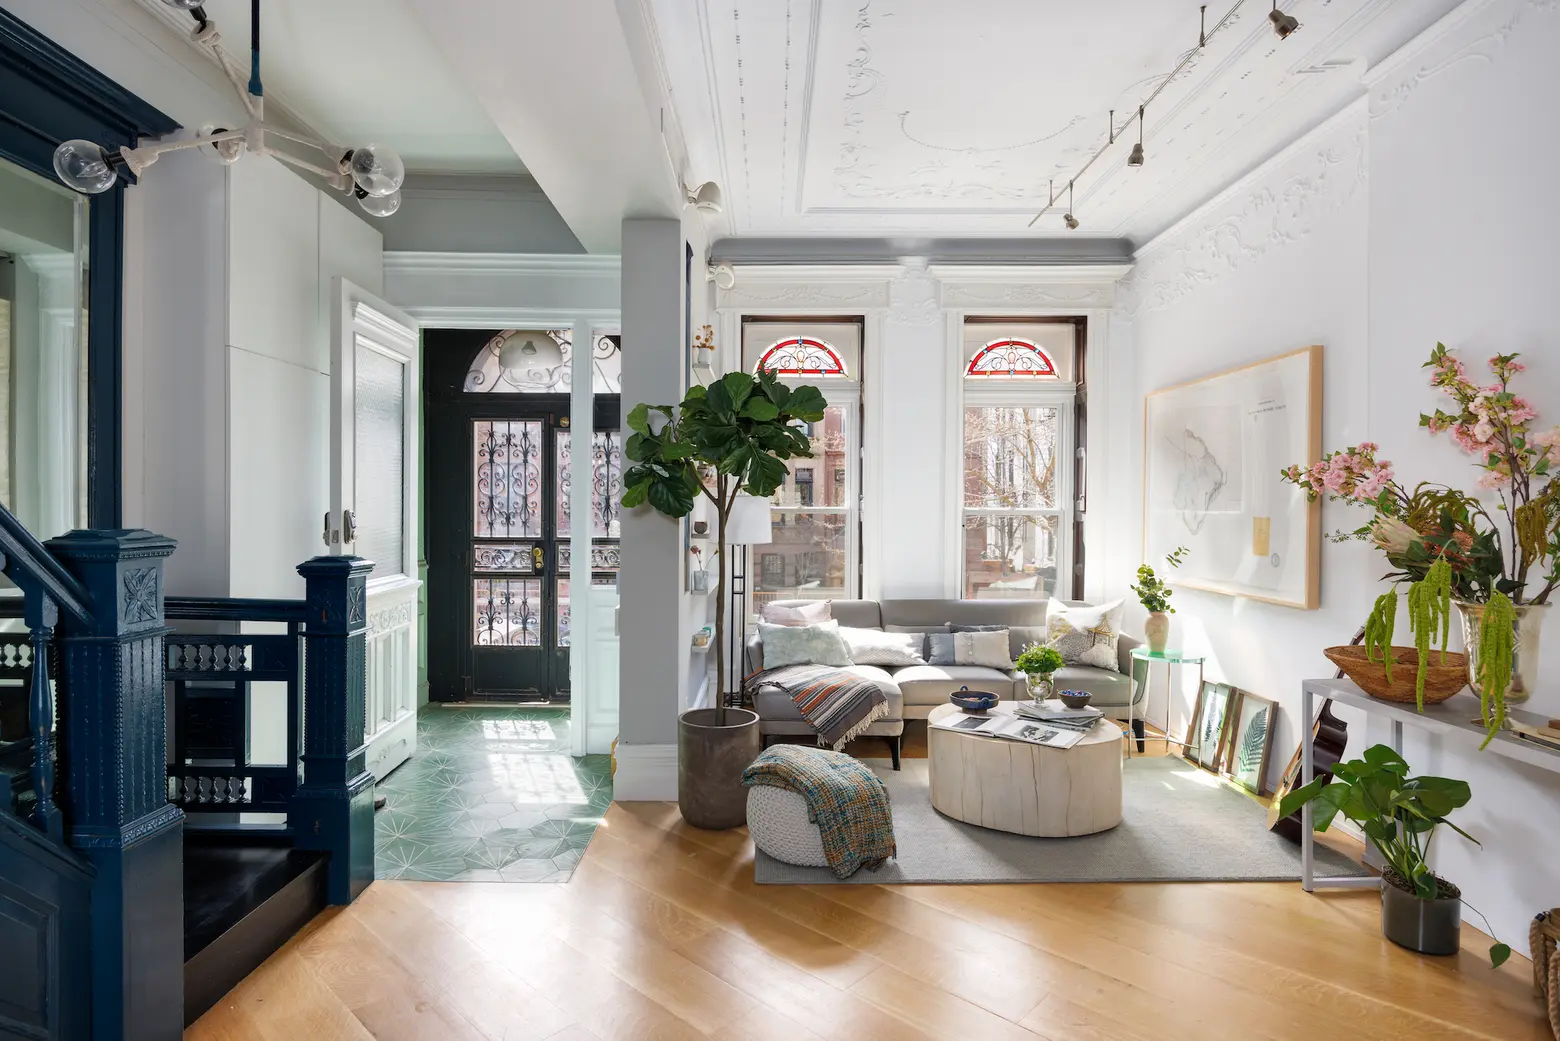 Prospect Heights brownstone with an Elizabeth Roberts renovation and terraced garden asks $4.5M